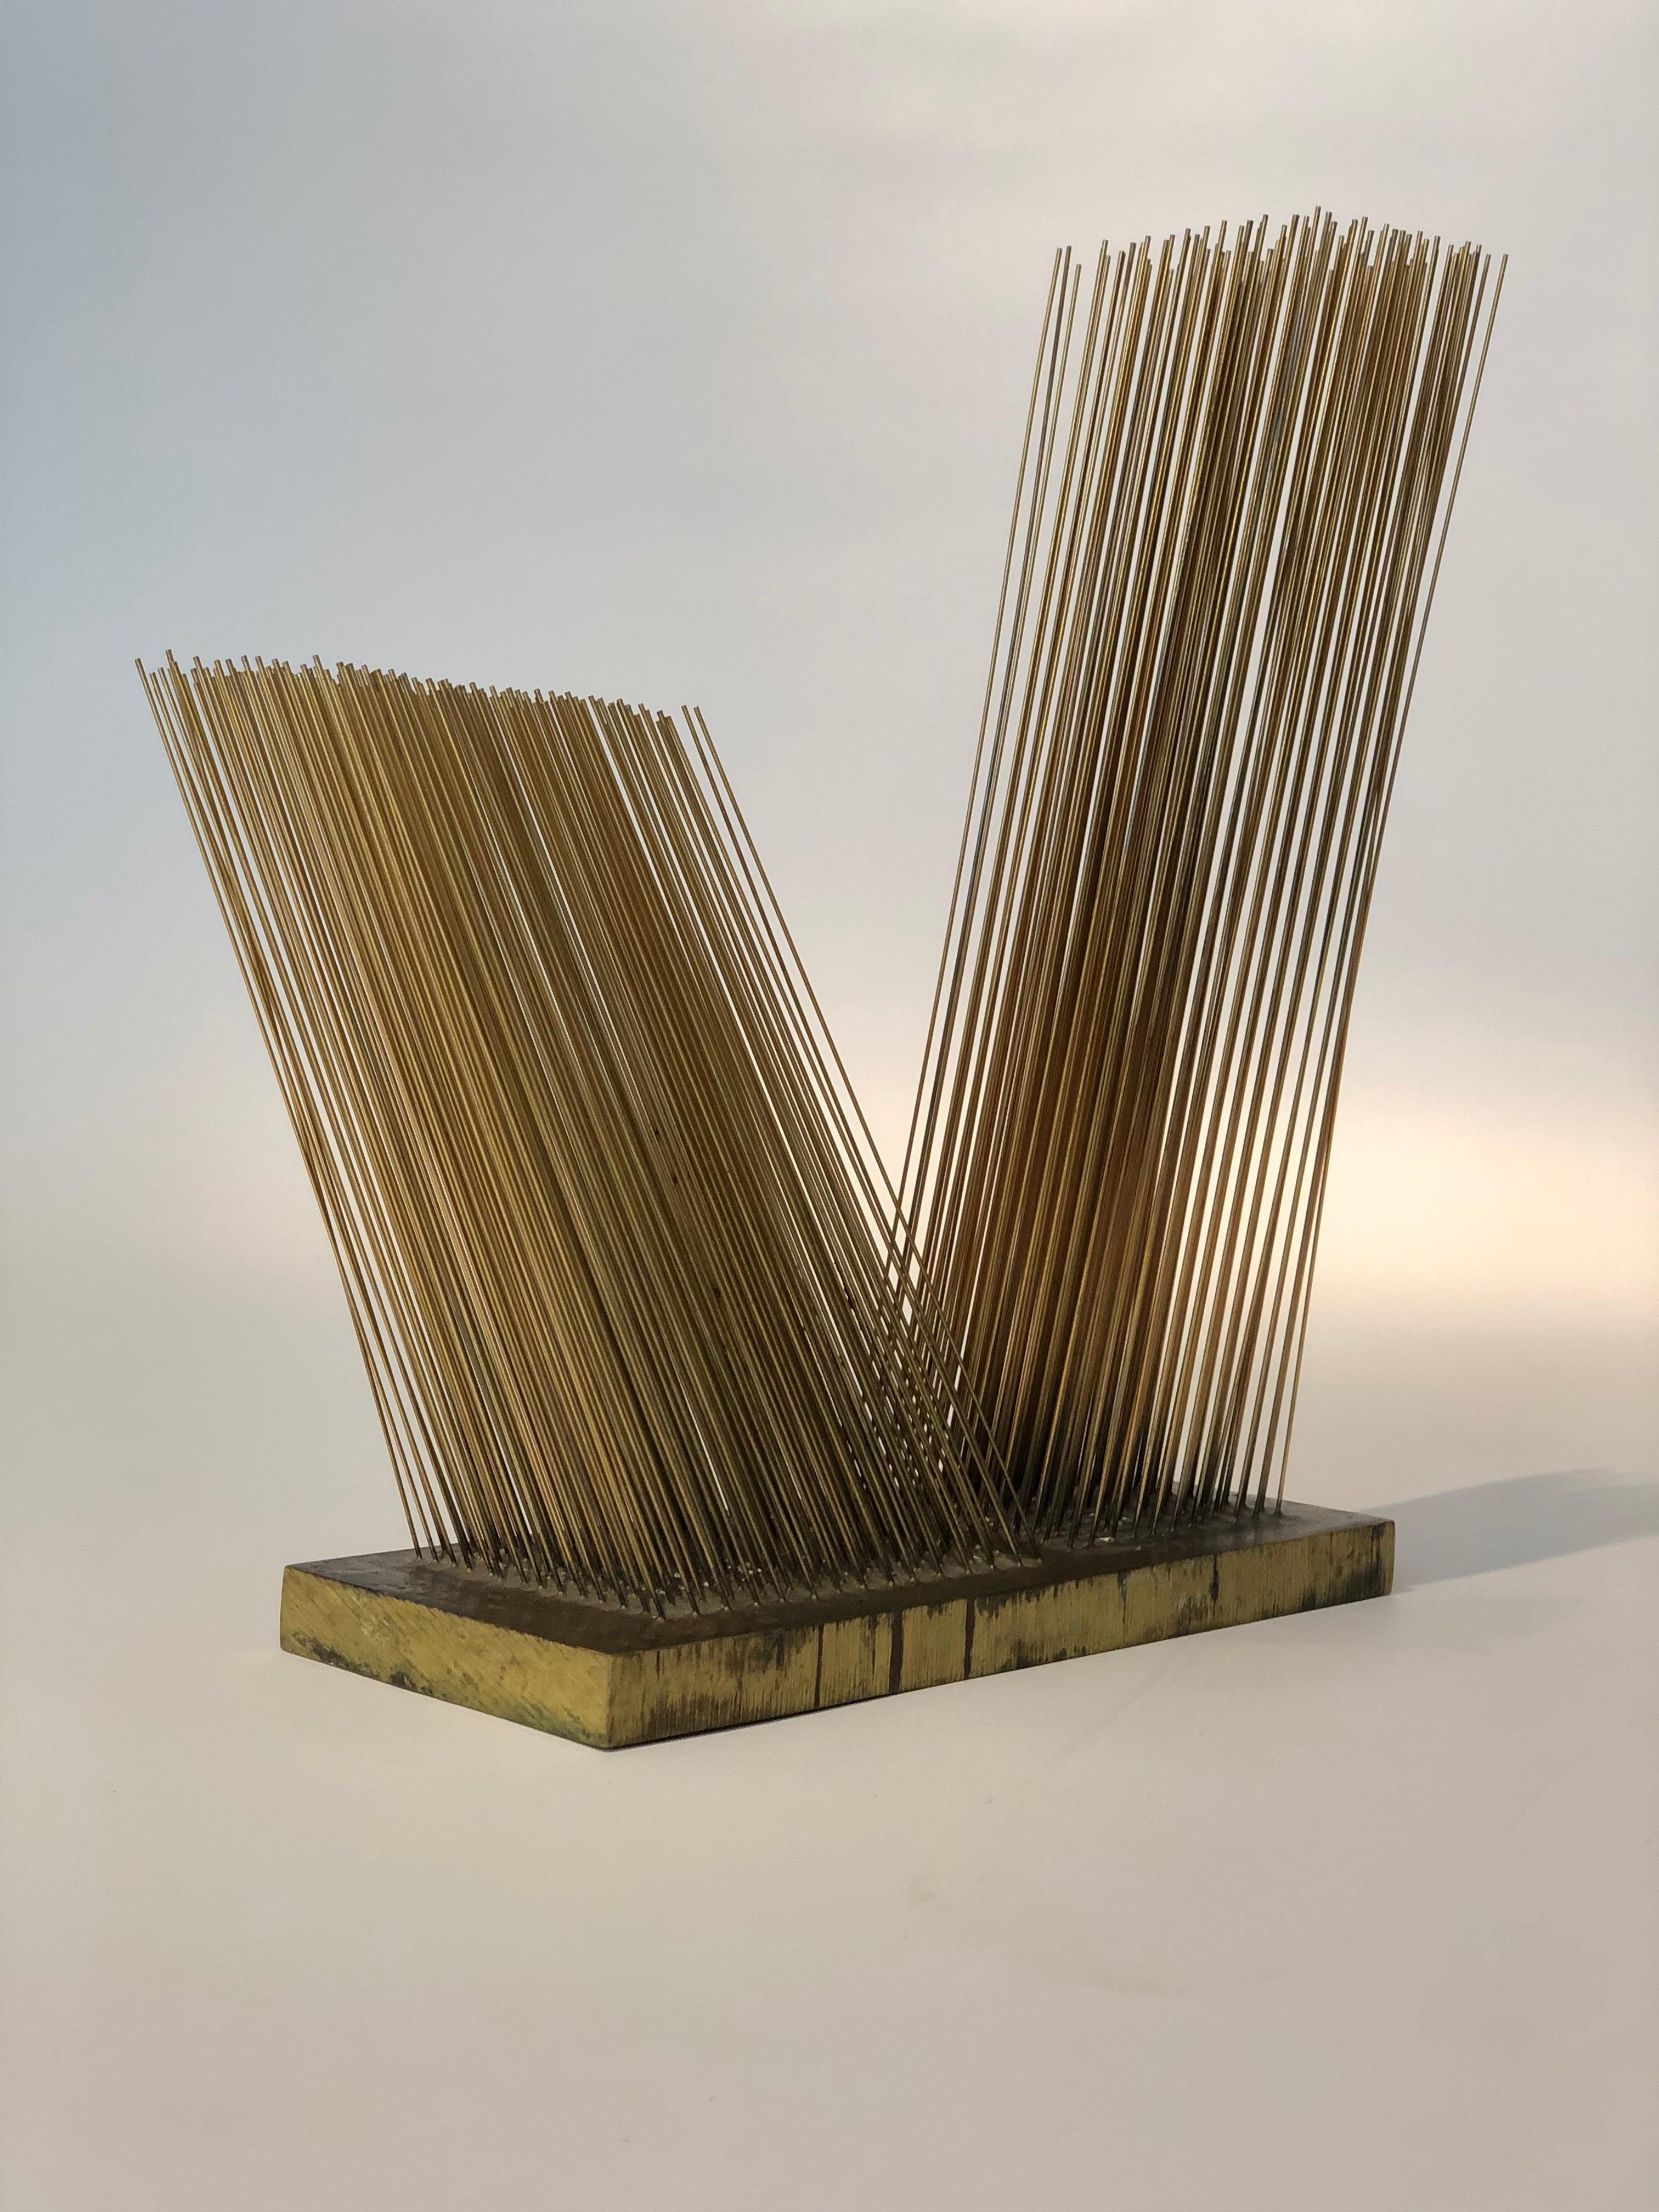 Rare Harry Bertoia sonambient sculpture. Pair of off-axis bronze rod arrays silver soldered onto a solid bronze base, circa 1967. Sold with a certificate of authenticity by the Hary Bertoia Foundation.
Provenance: Obelisk Gallery, Boston Aquired